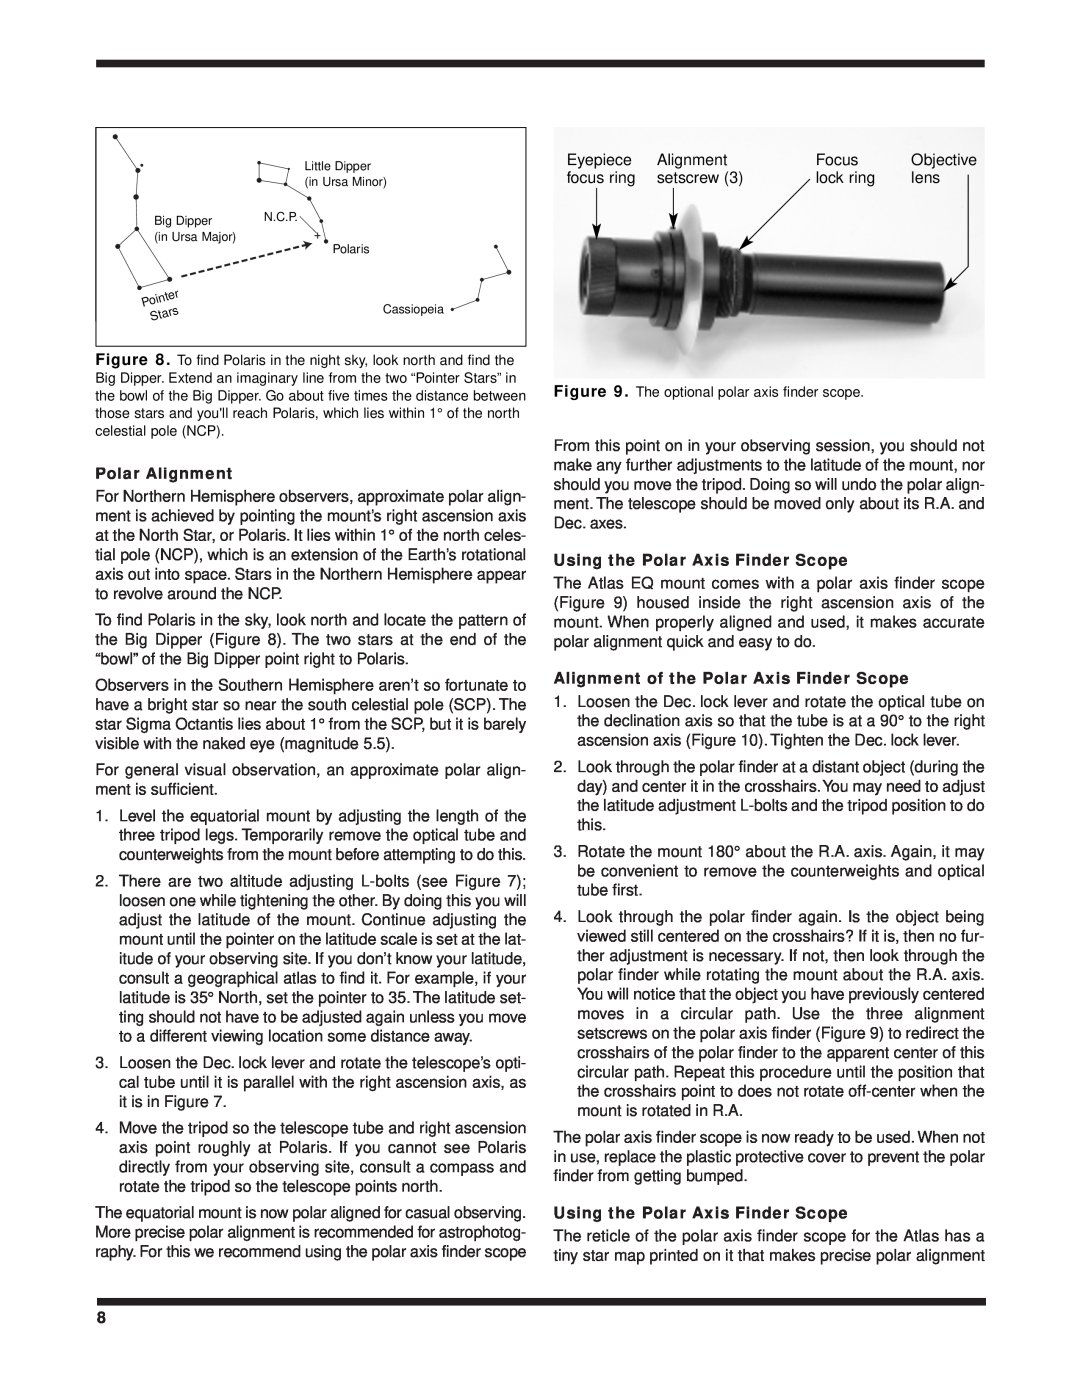 Orion 8 EQ instruction manual Polar Alignment, Using the Polar Axis Finder Scope, Alignment of the Polar Axis Finder Scope 